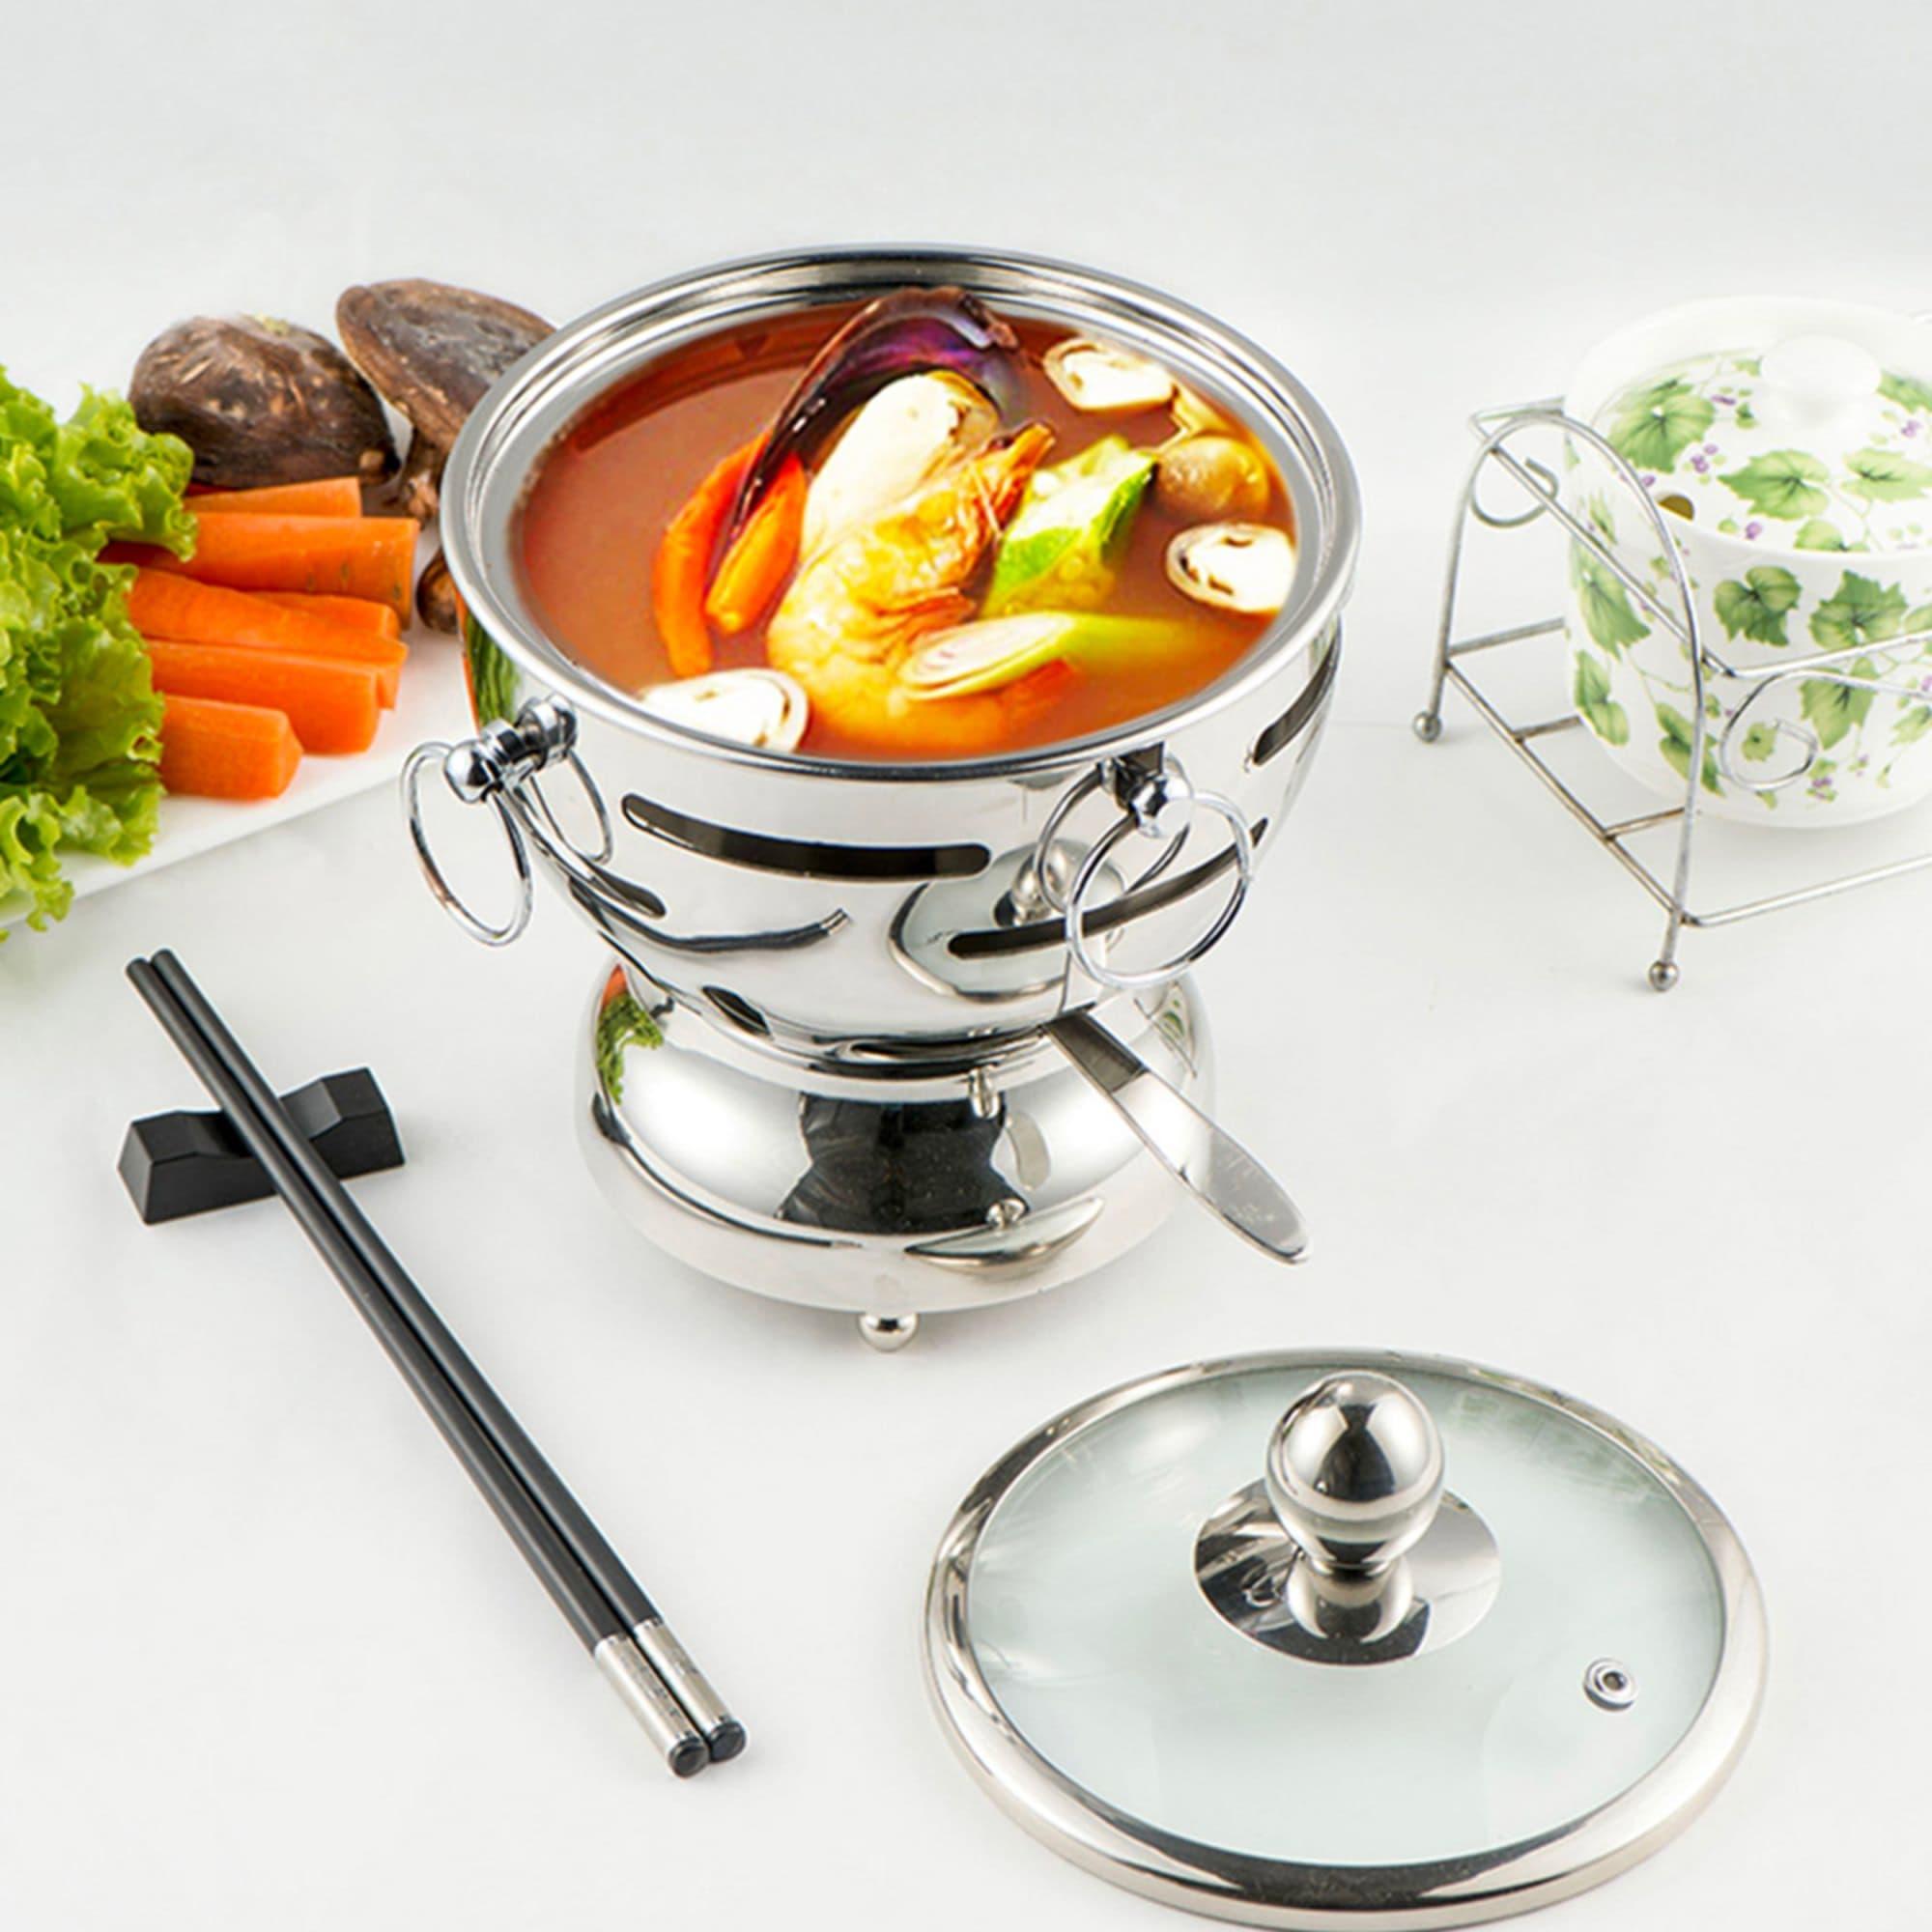 Soga Round Stainless Steel Single Hot Pot with Glass Lid 18.5cm Set of 4 Image 3